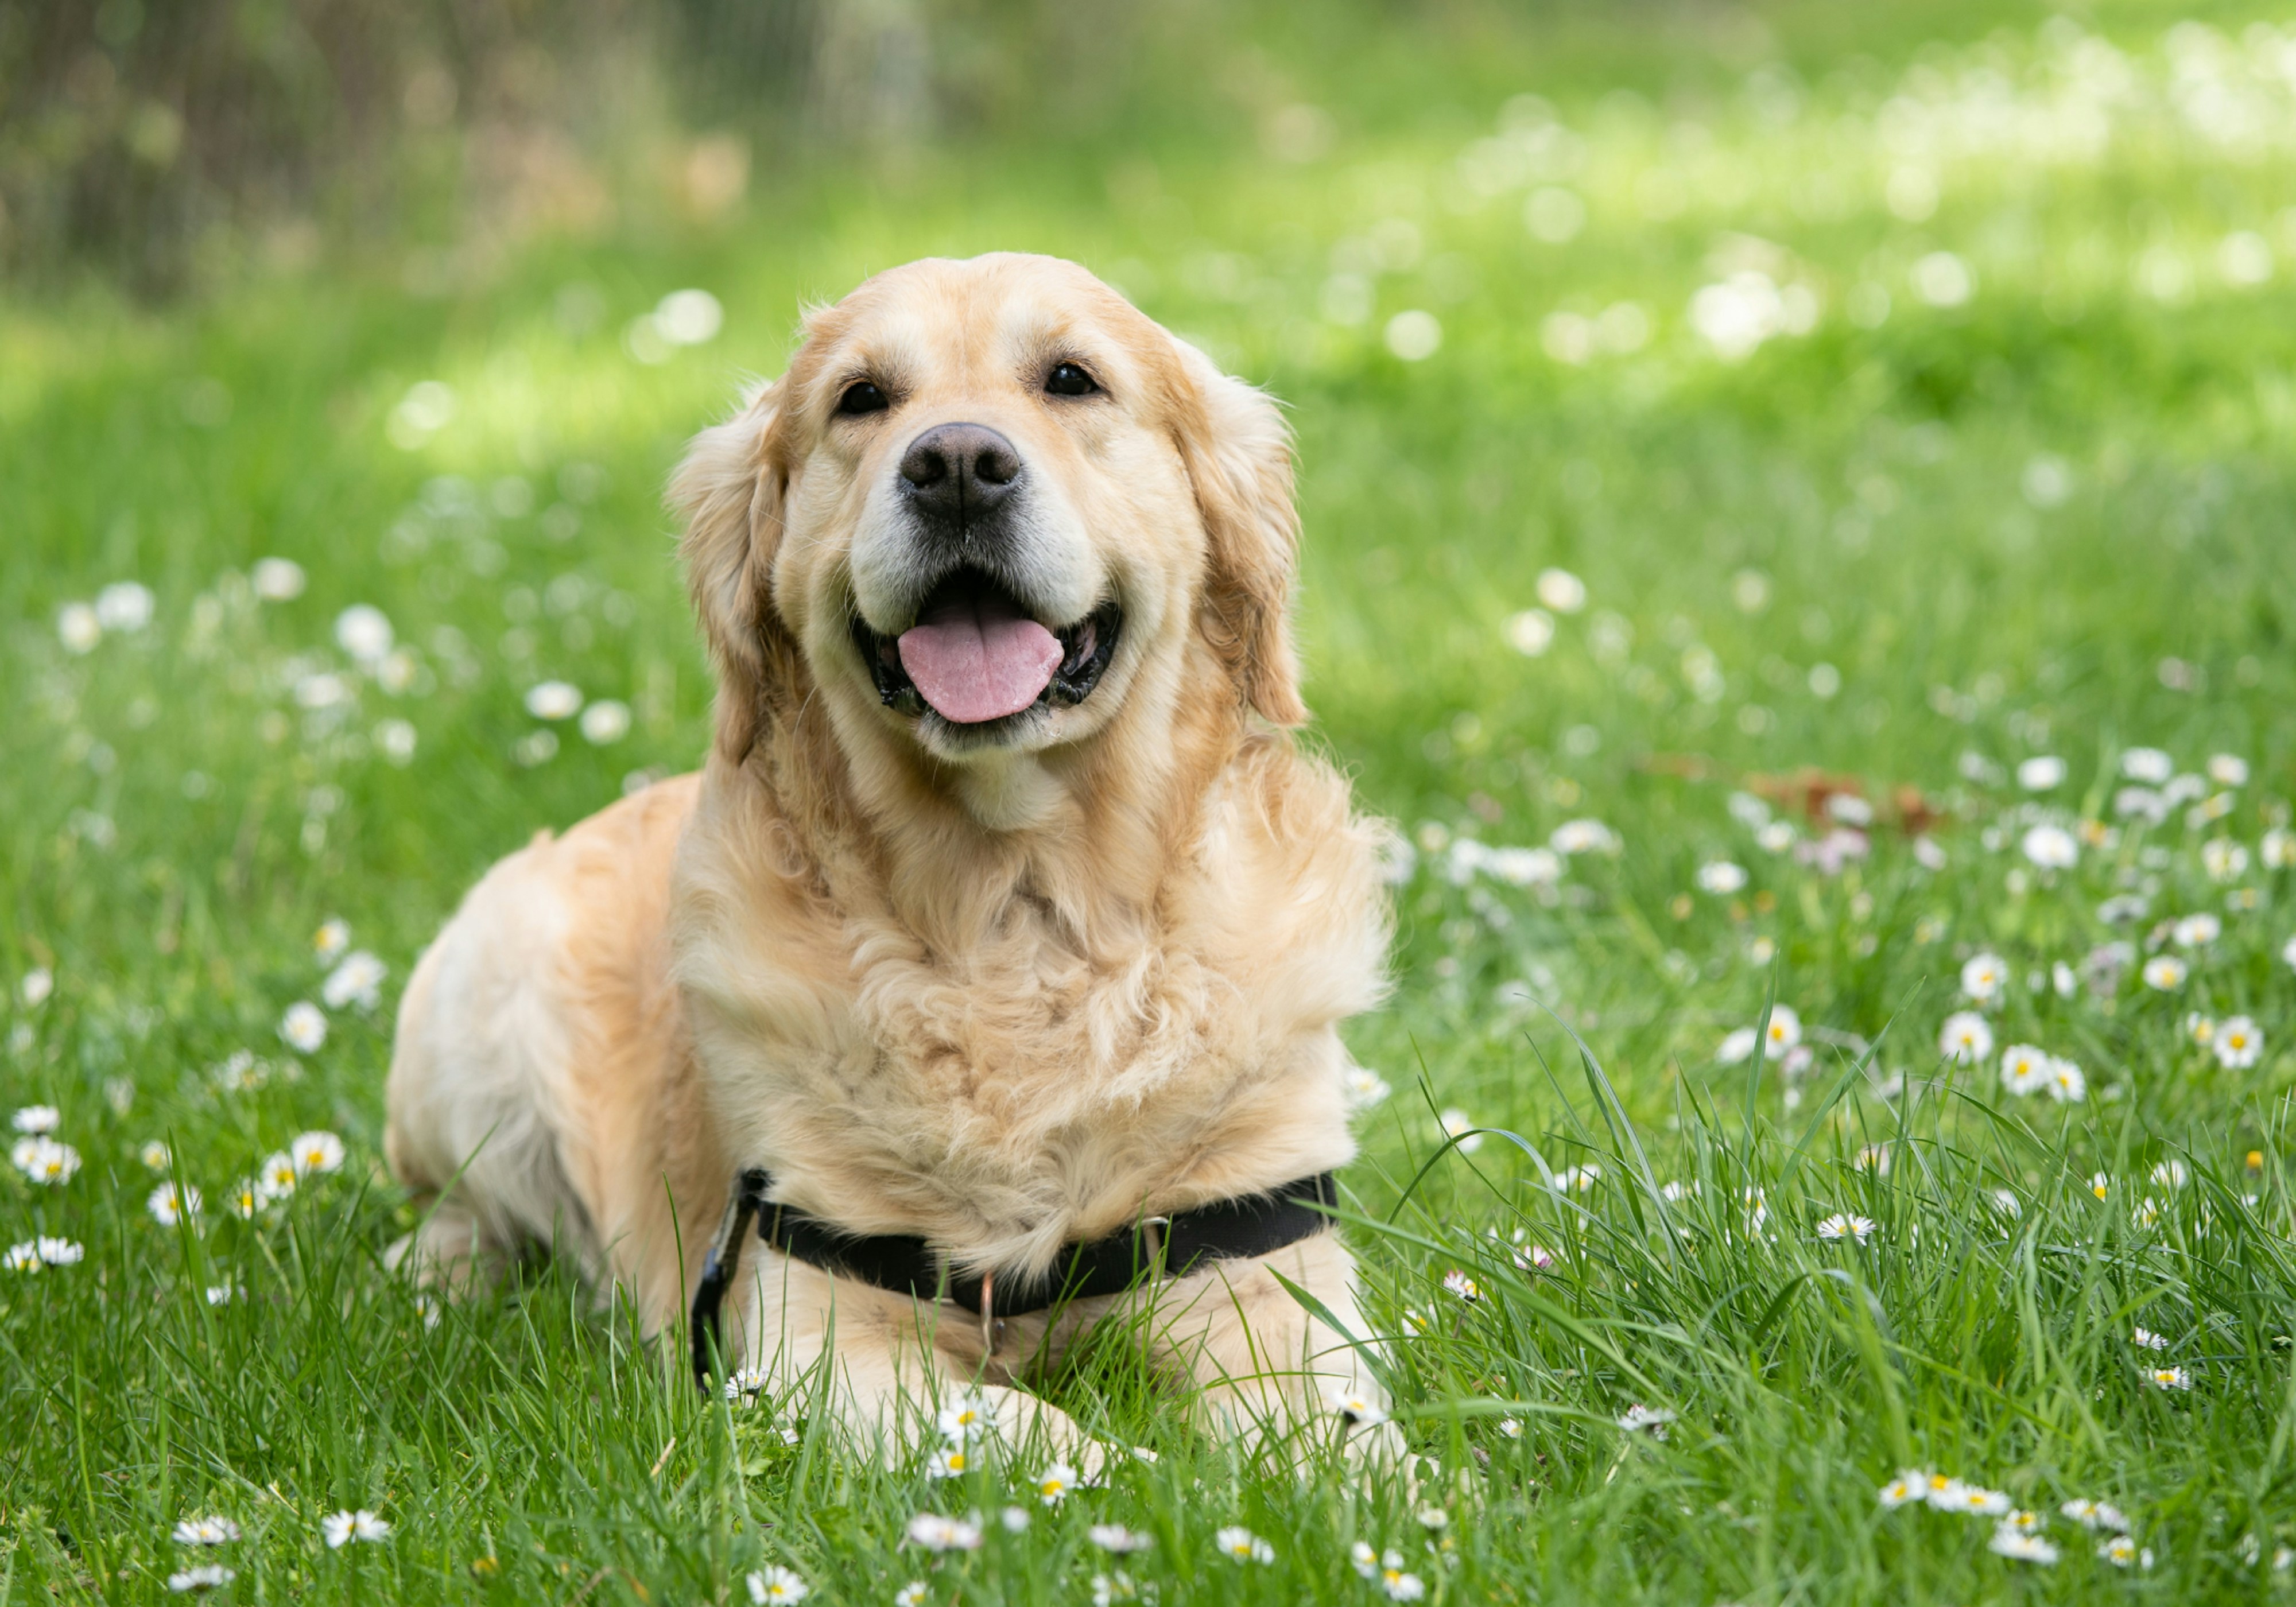 treatment for hip dysplasia in dogs